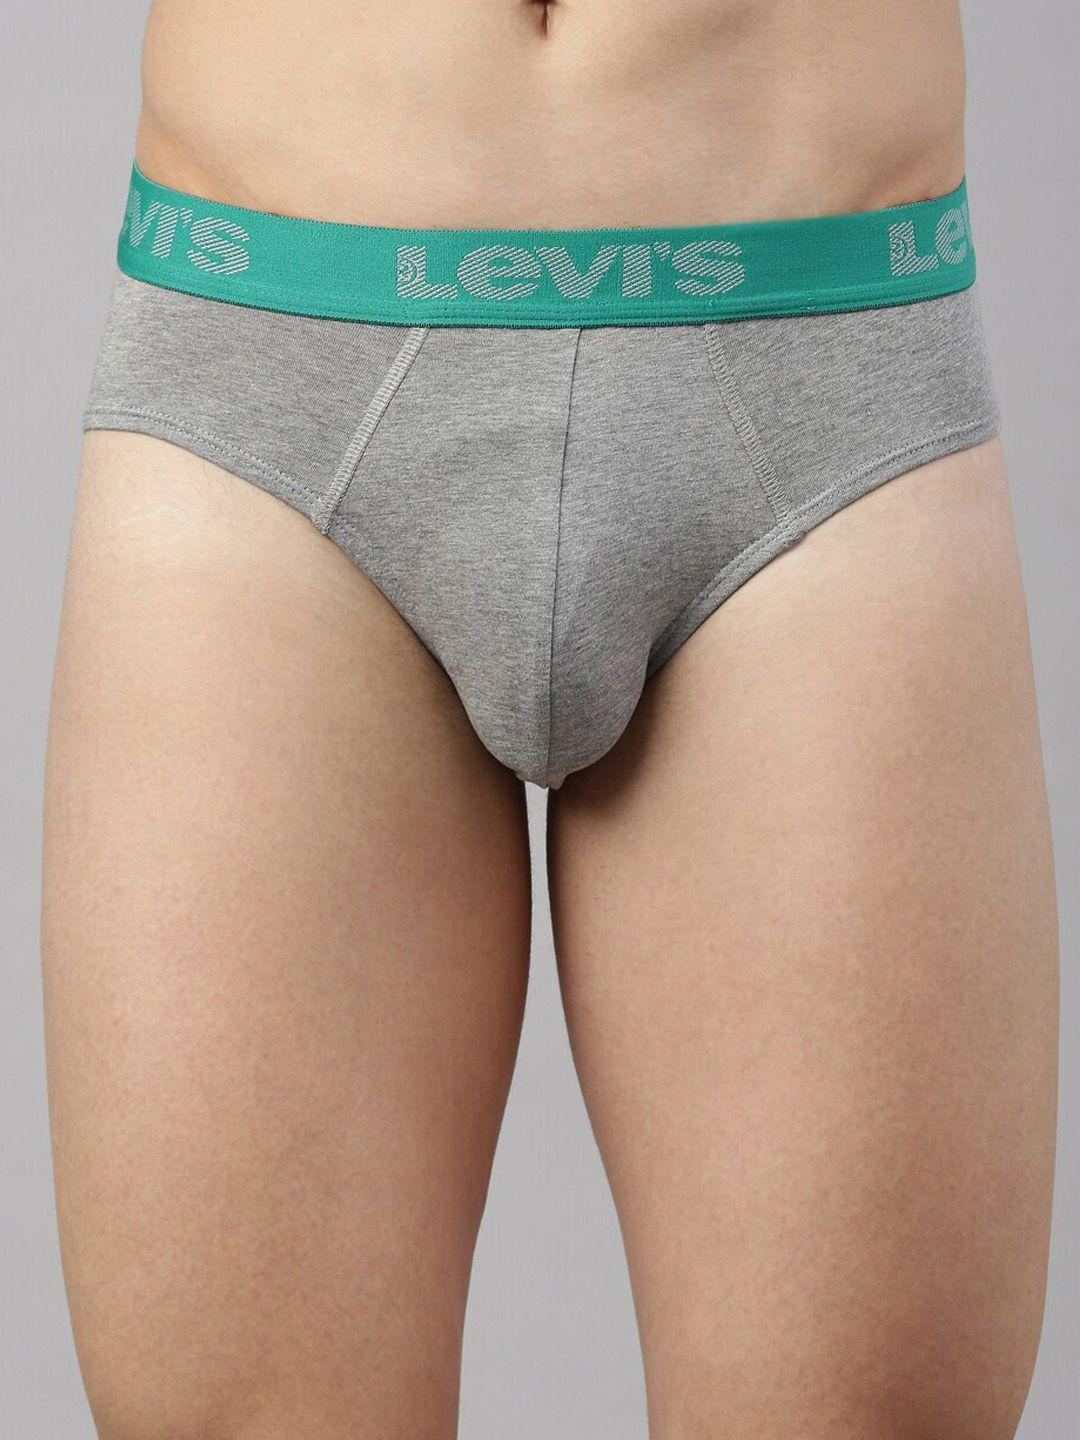 Levis Men Smartskin Technology Cotton Active Briefs with Tag Free Comfort-066